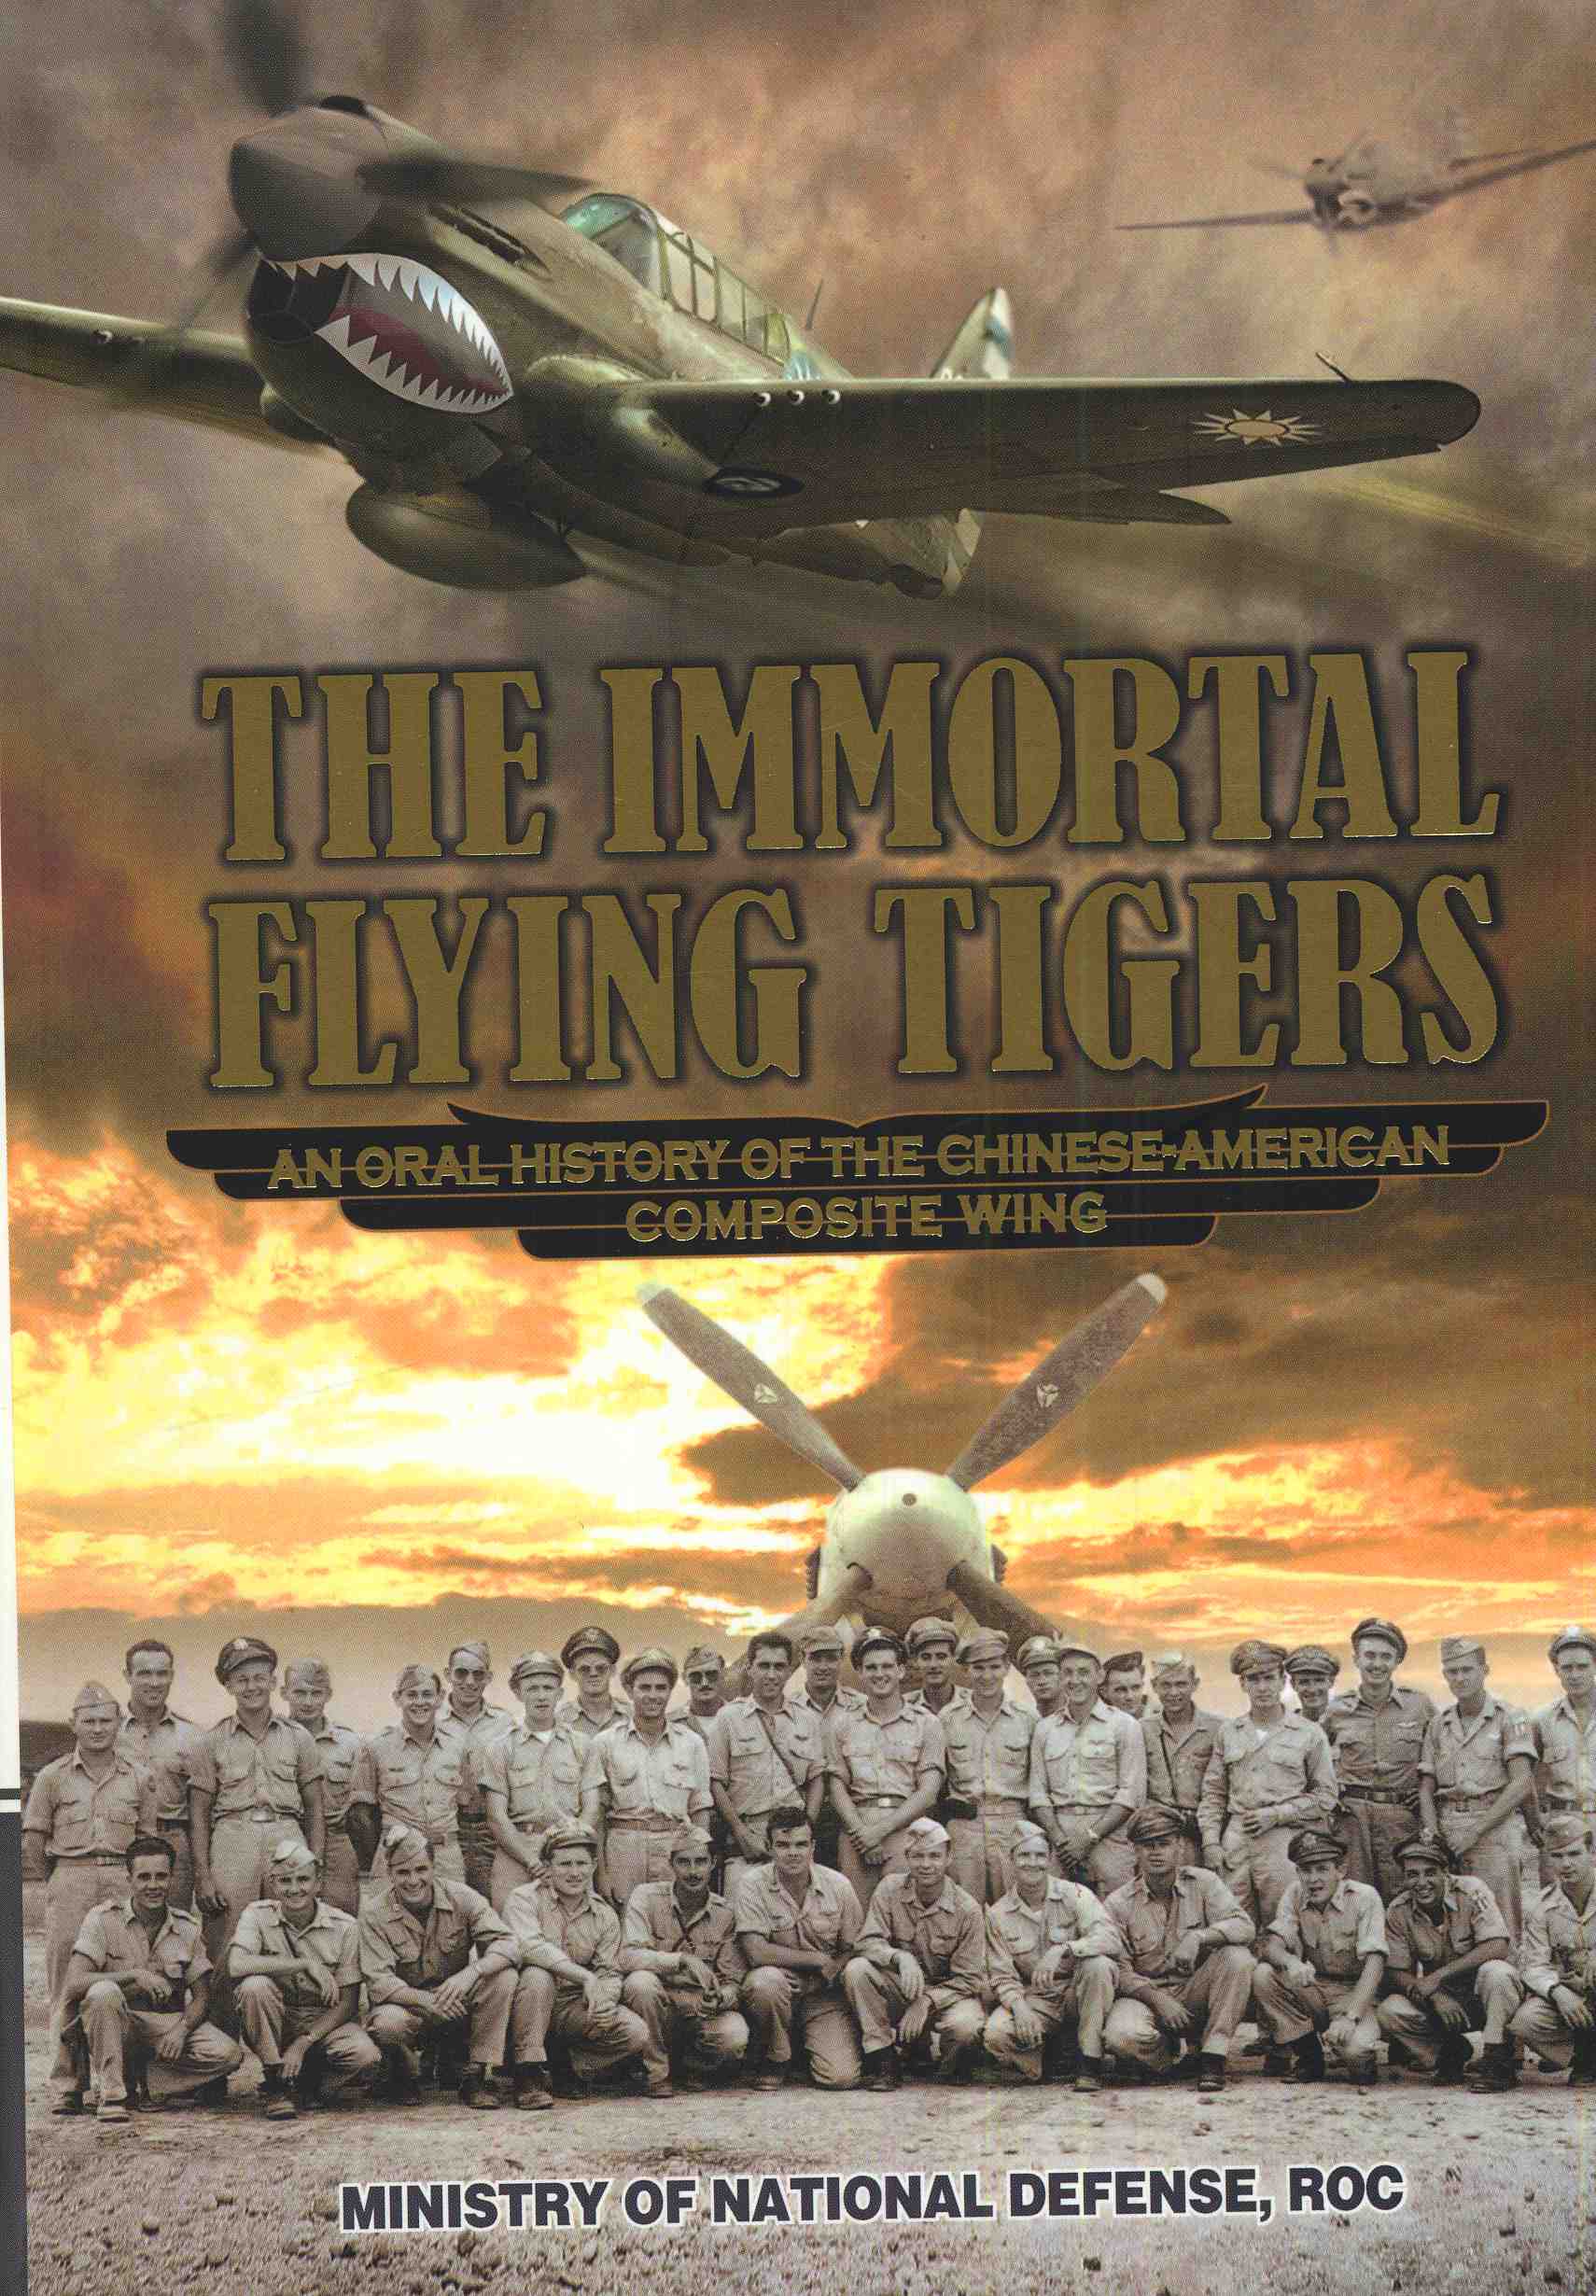 THE IMMORTAL FLYING TIGERS: AN ORAL HISTORY OF THE CHINESE-AMERICAN COMPOSITE WING